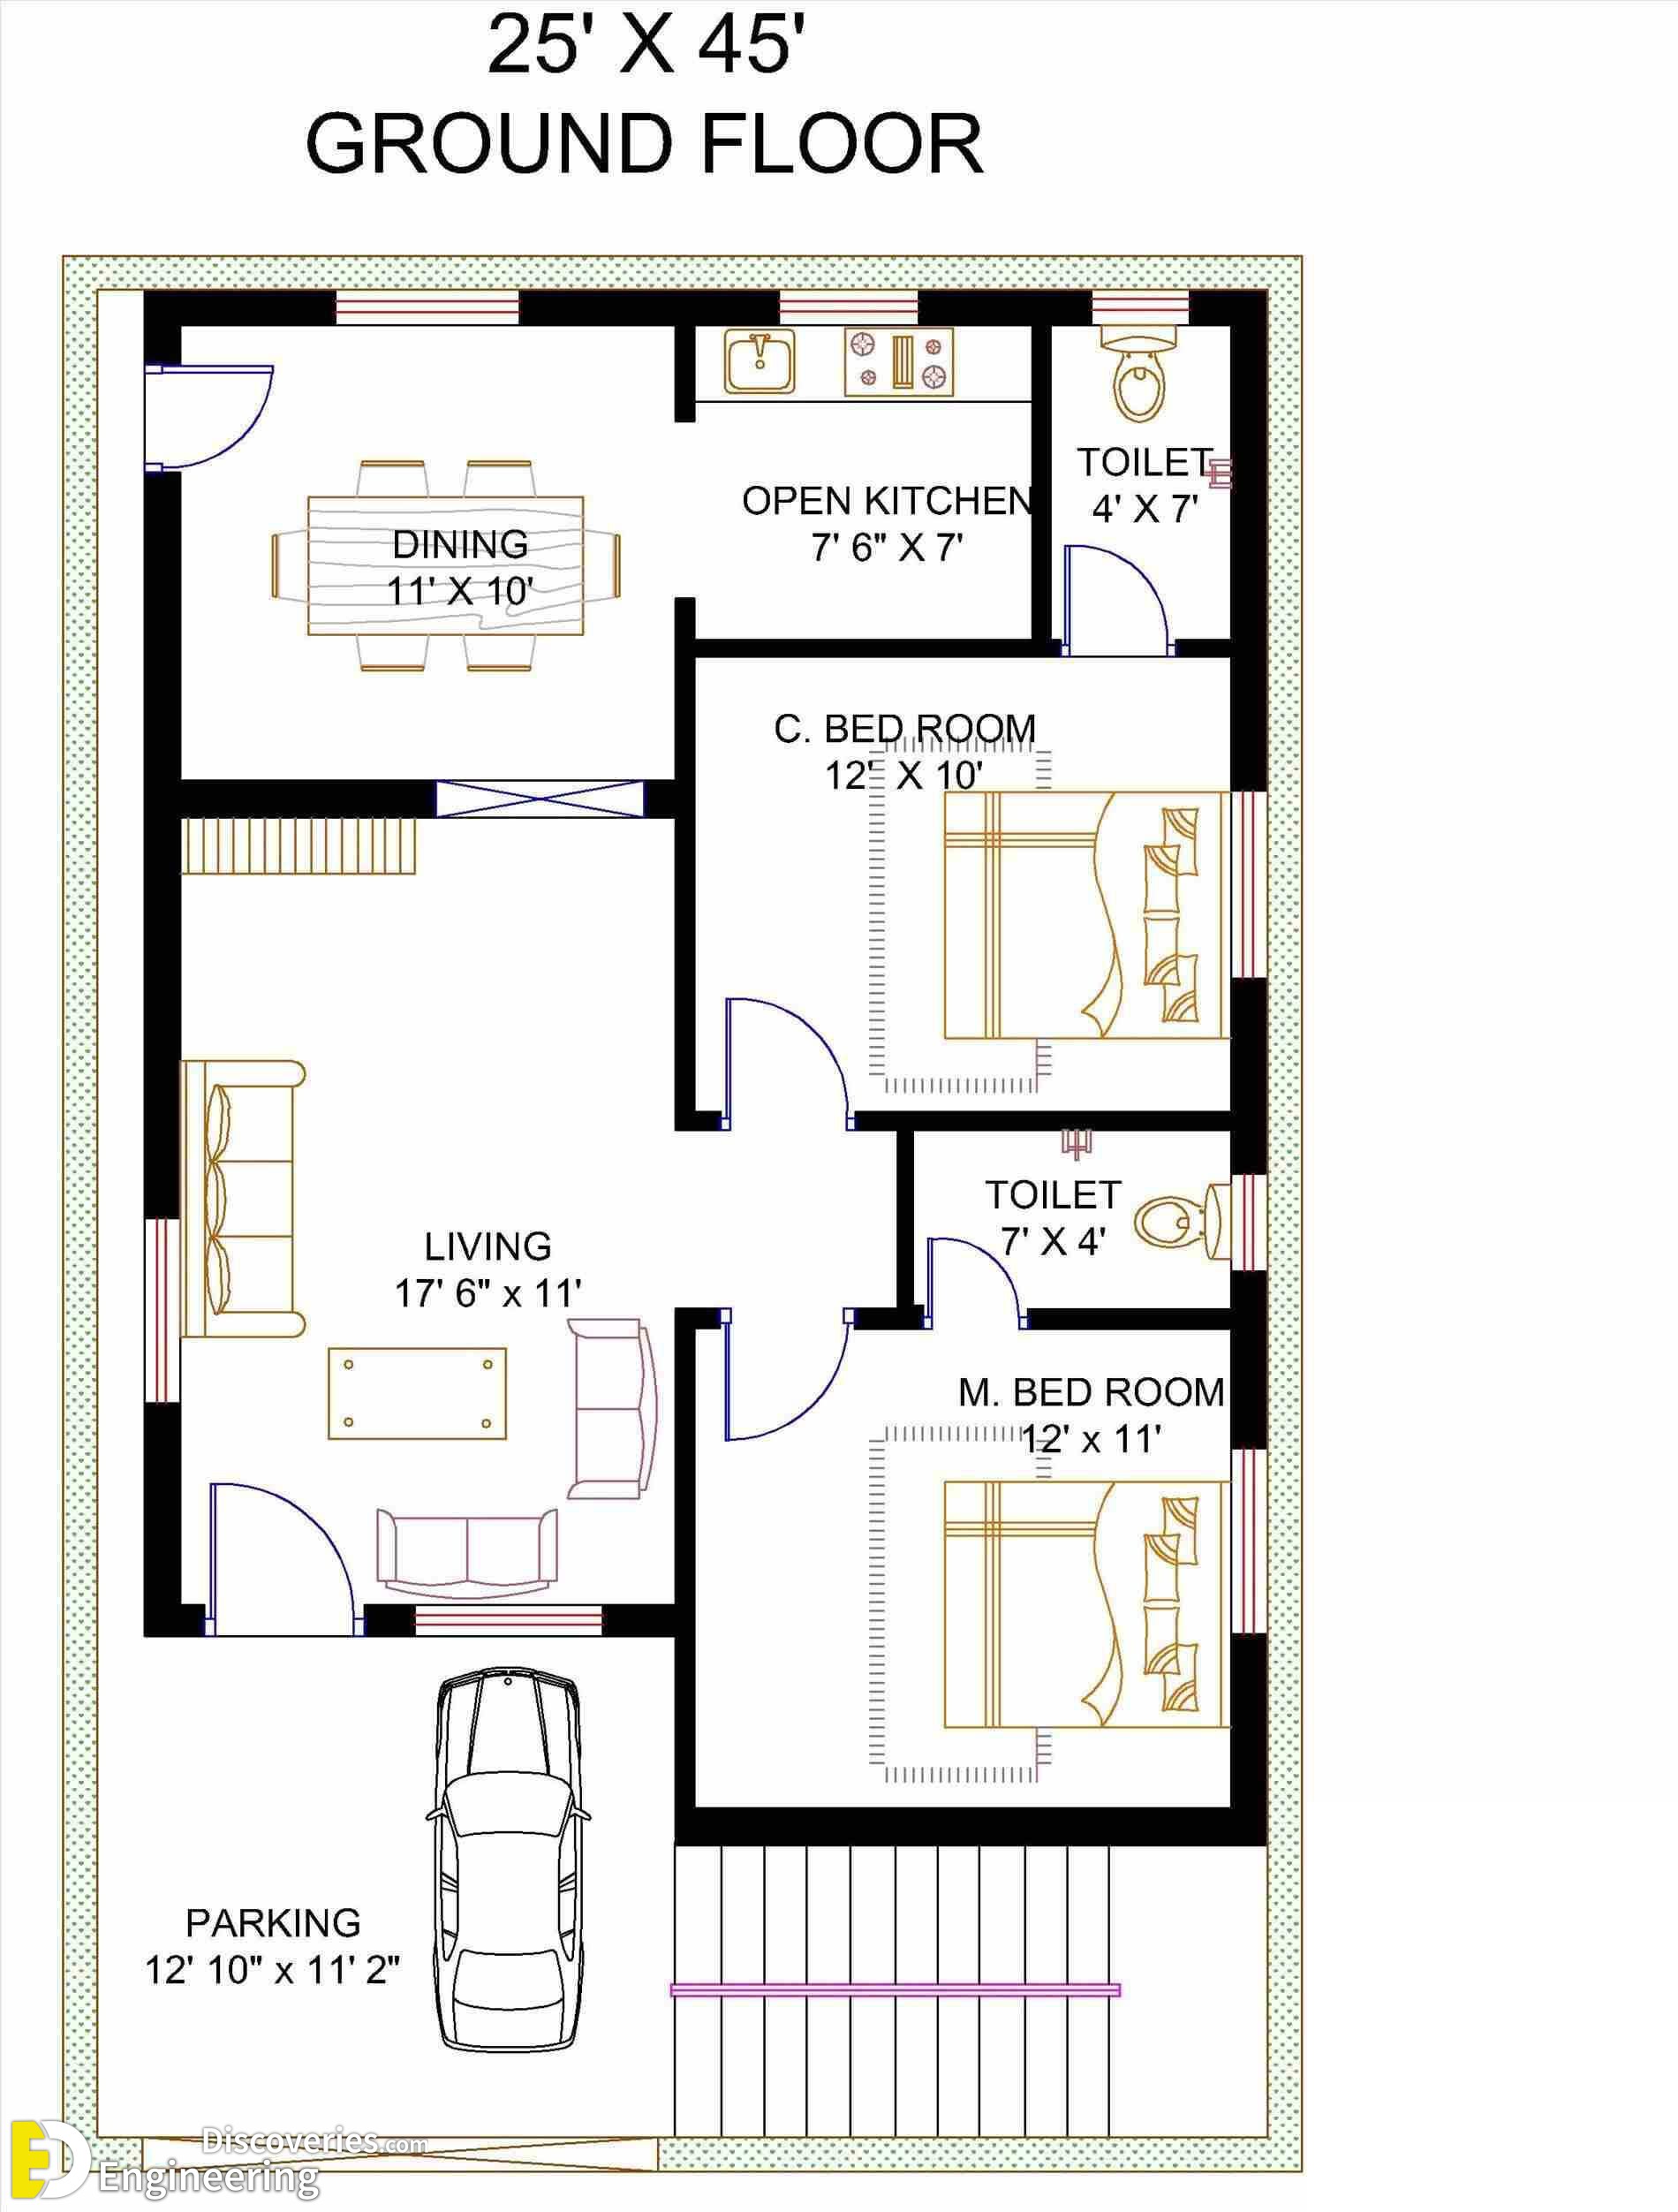 2d Floor Plan Design at Rs 2/square feet in Hyderabad | ID: 25975141591